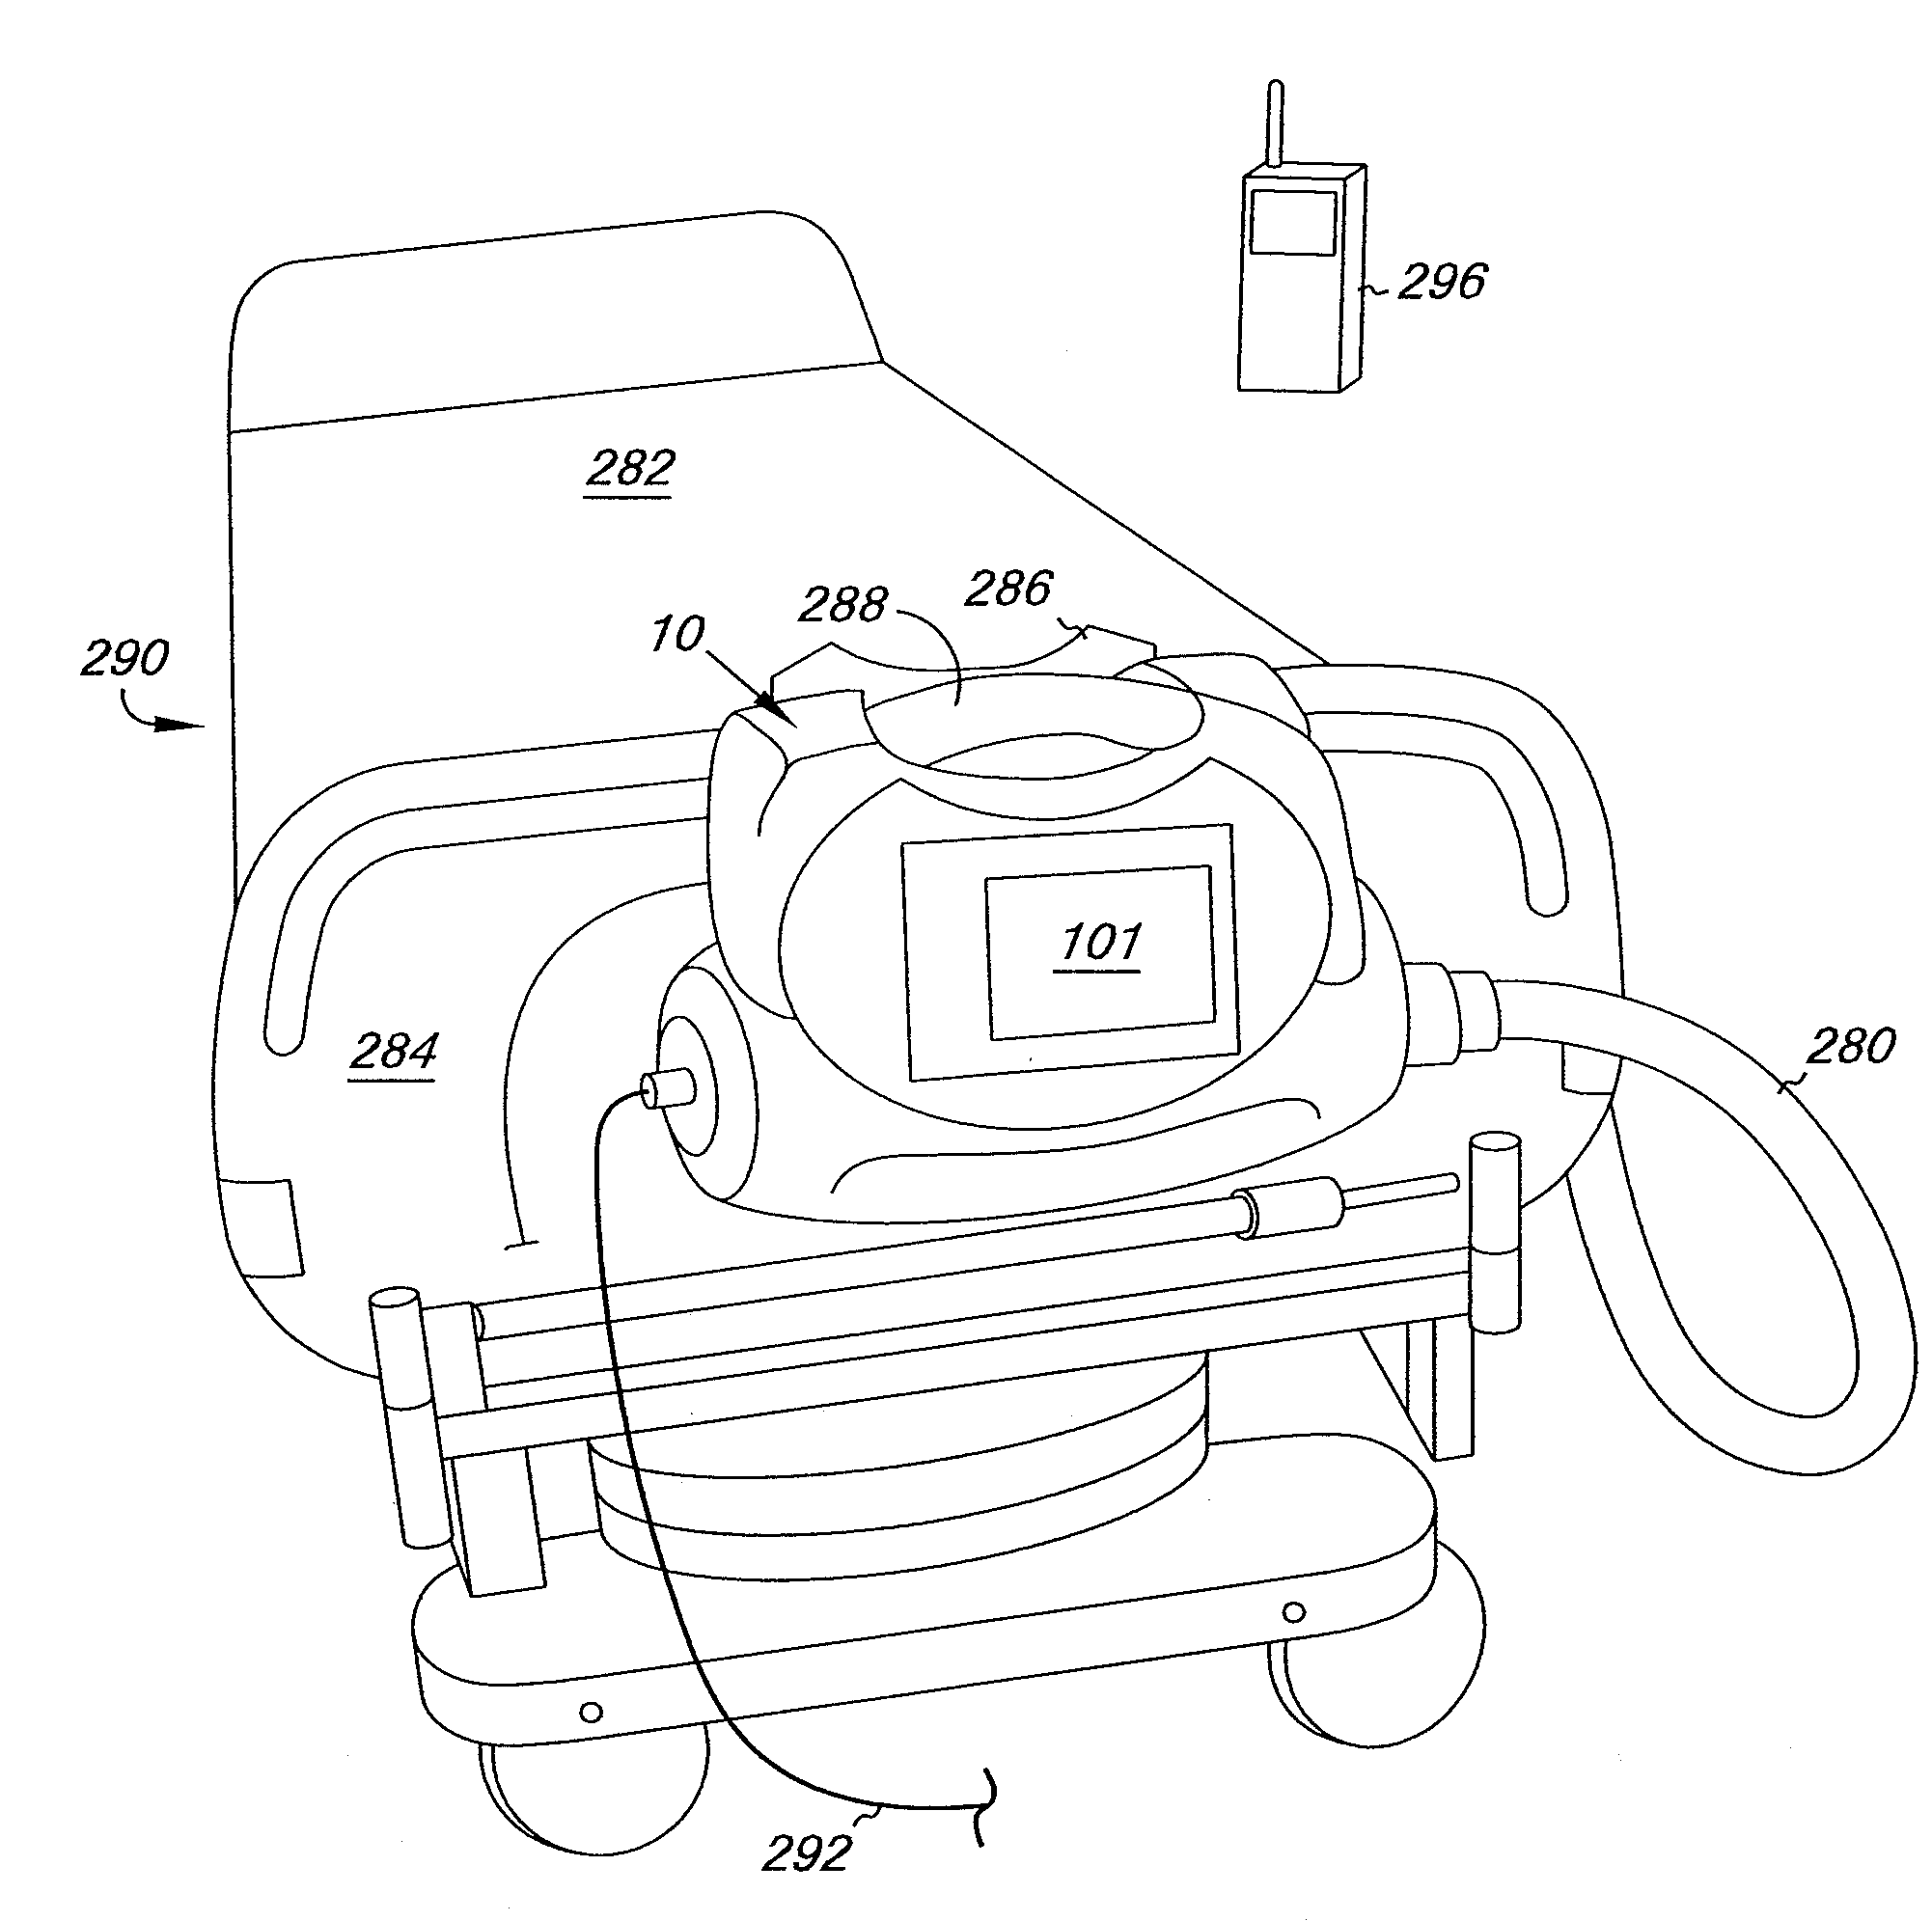 System and Method for Maintaining Air Inflatable Mattress Configuration